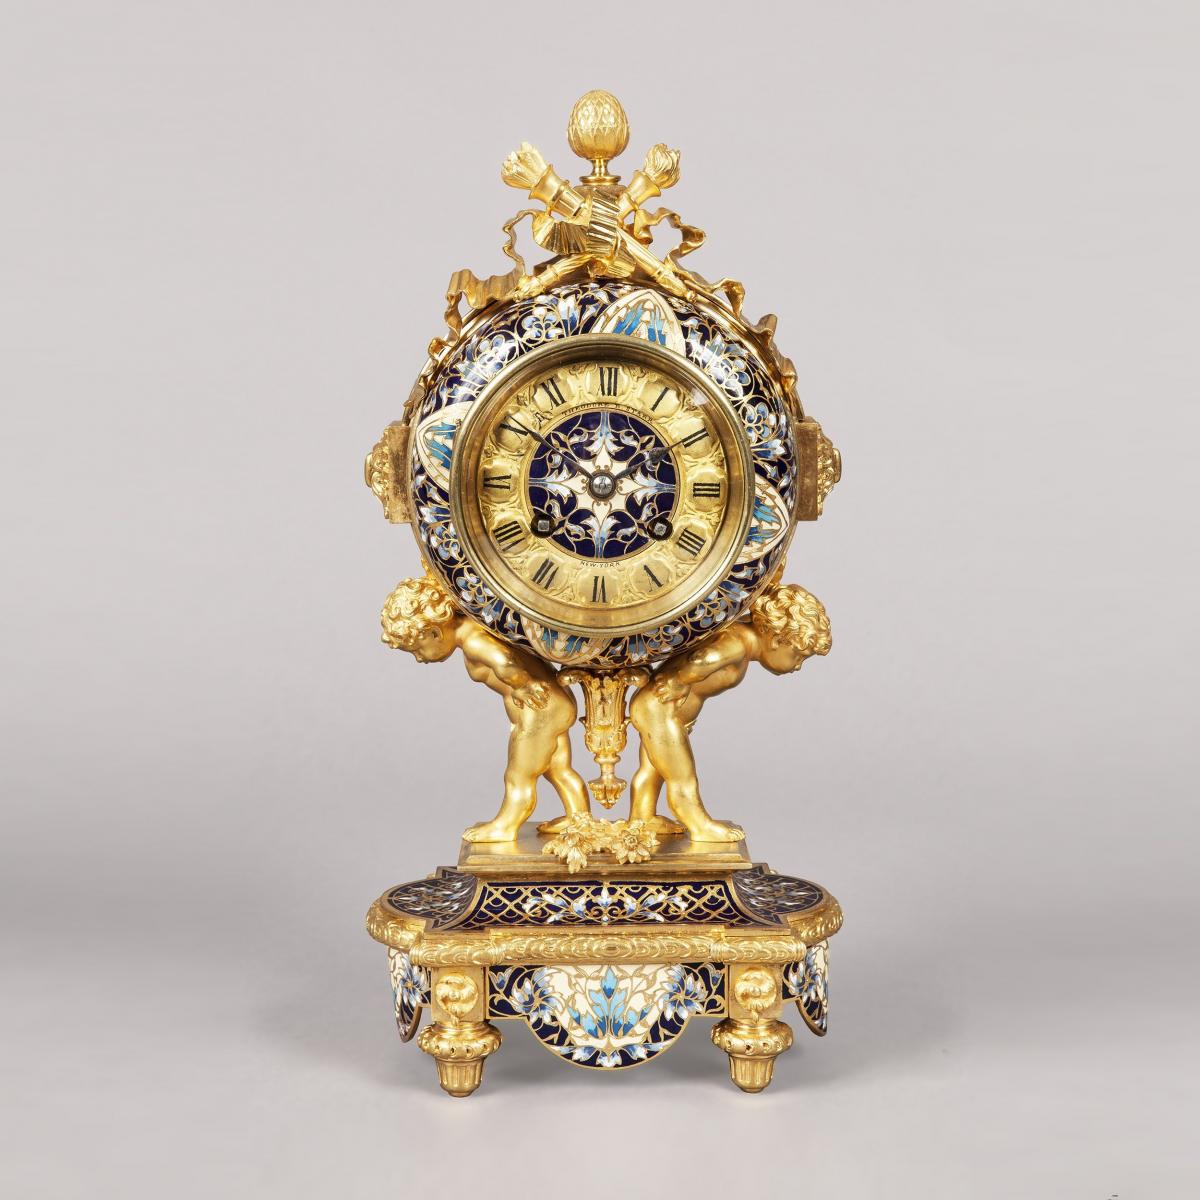 French Ormolu & Enamel Clock Garniture Retailed by Theodore Starr and Co, New York